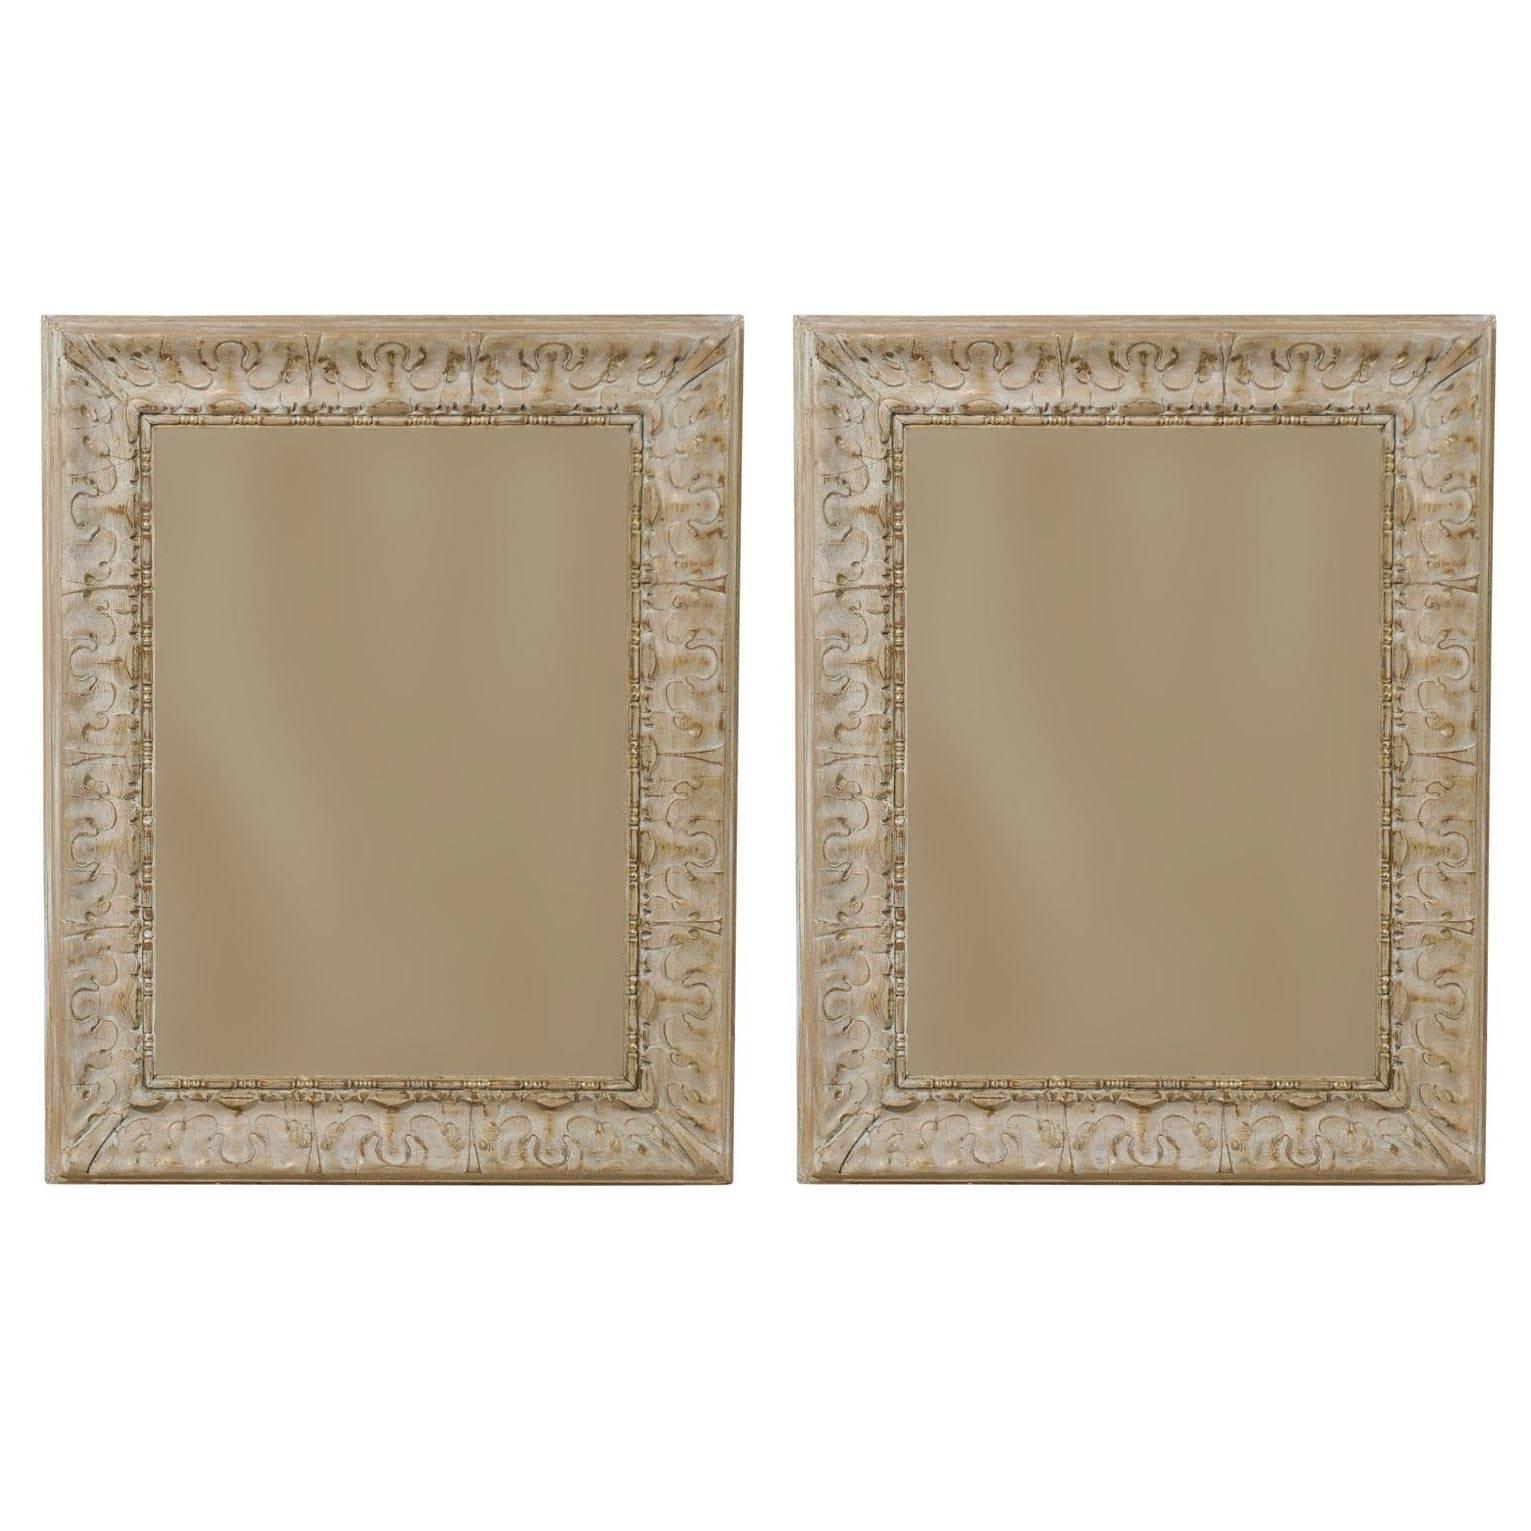 Pair of American Rectangular Mirrors with Venetian Style Frames